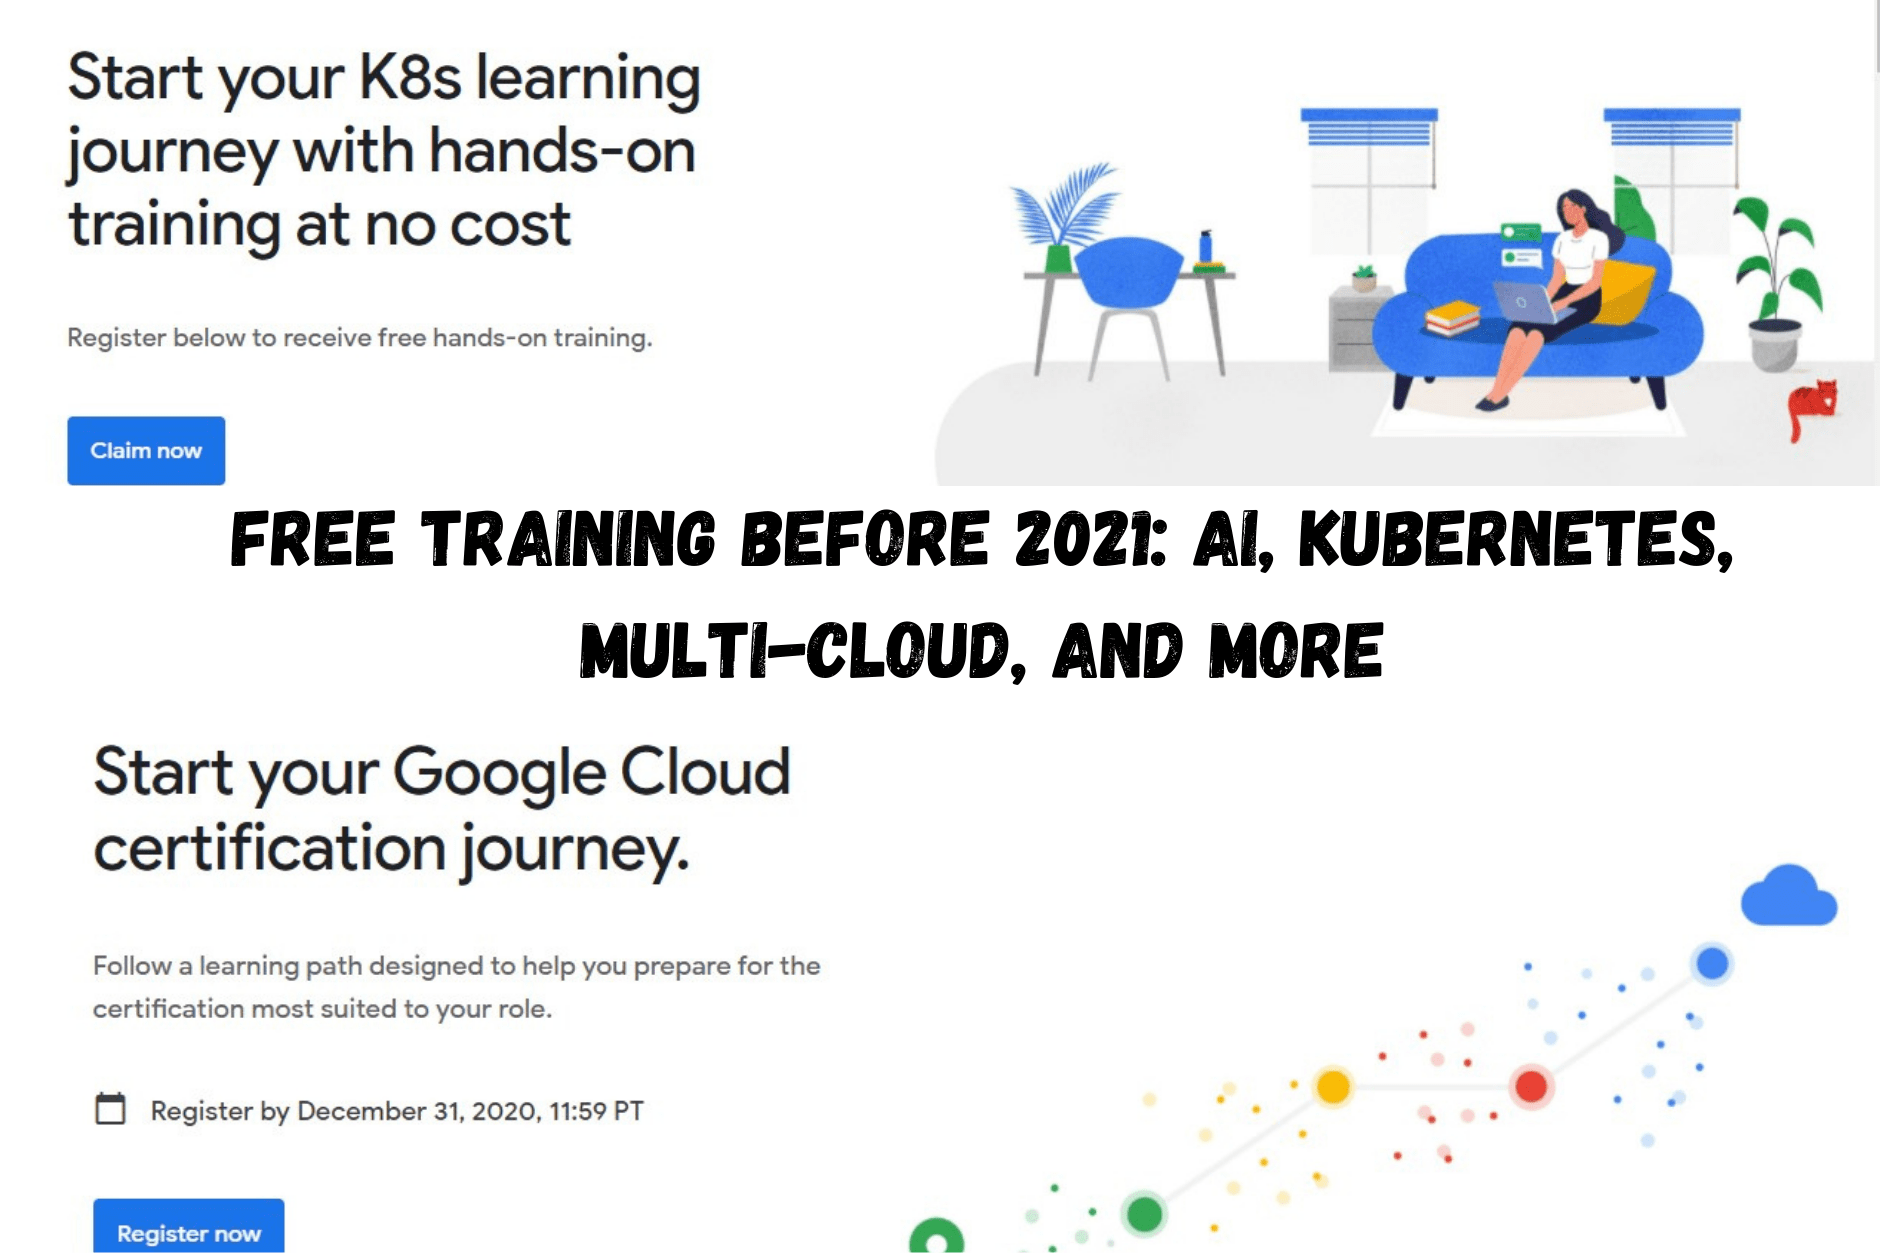 Free training before 2021: AI, Kubernetes, multi-cloud, and more